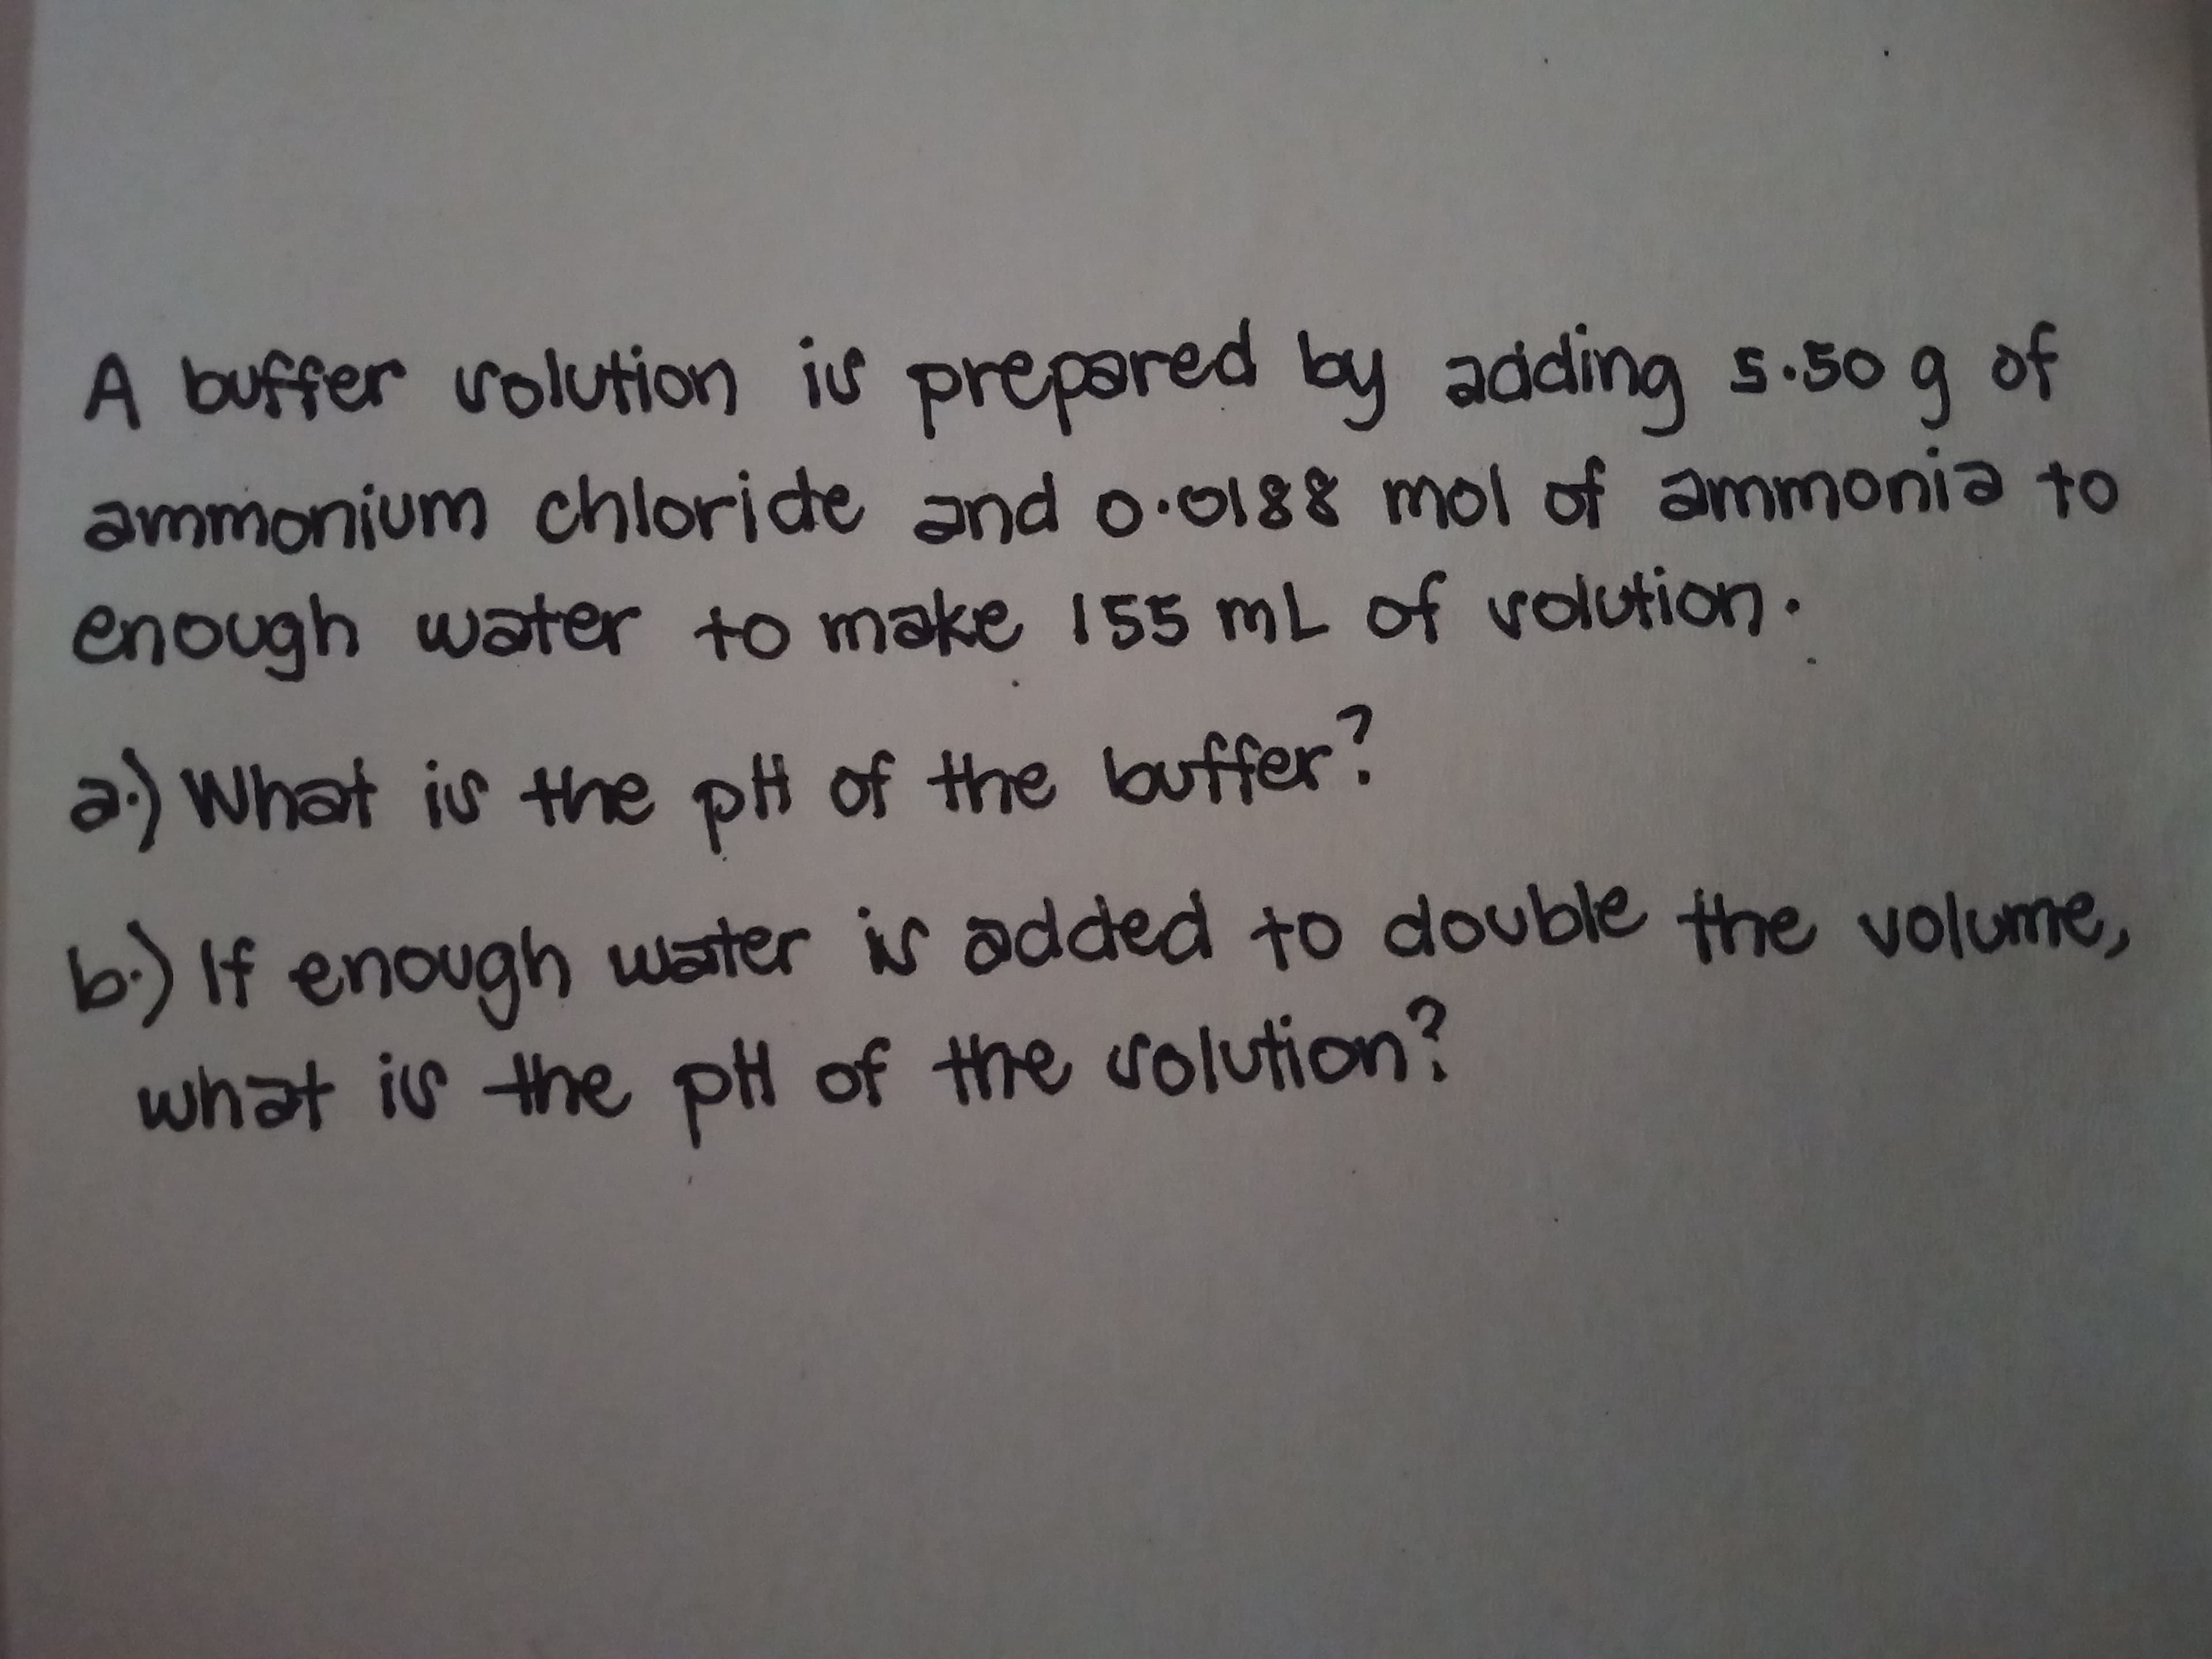 A buffer volution is prepared by adding s.50 g
of
ammonium chloride and o.0188 mol of ammonia to
enough water to make i55 mL of volution.
a) What is the pi of the ouffer?
